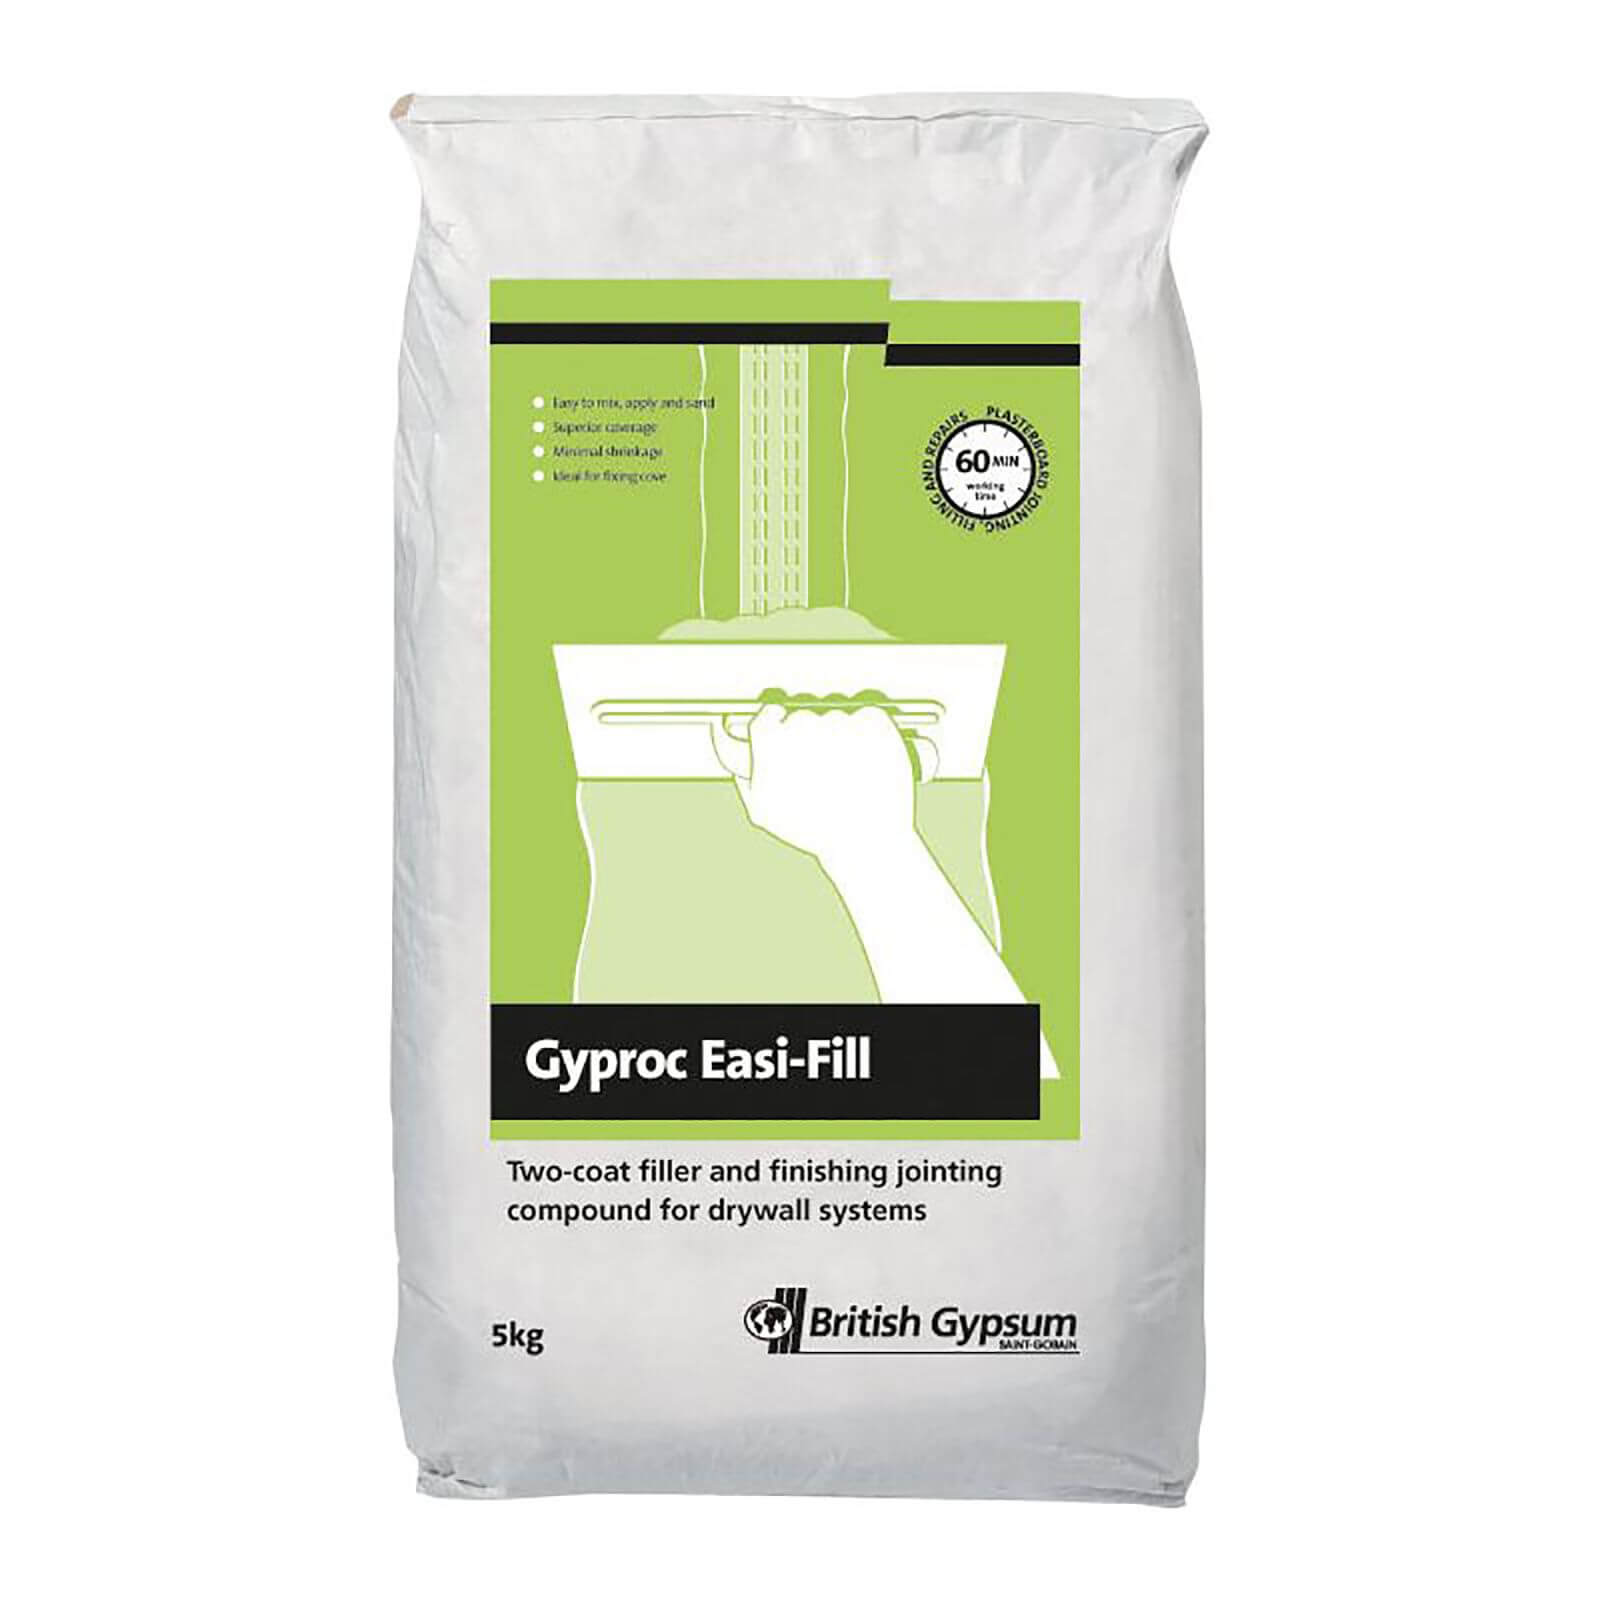 Photo of Gyproc Easi-fill - 5kg